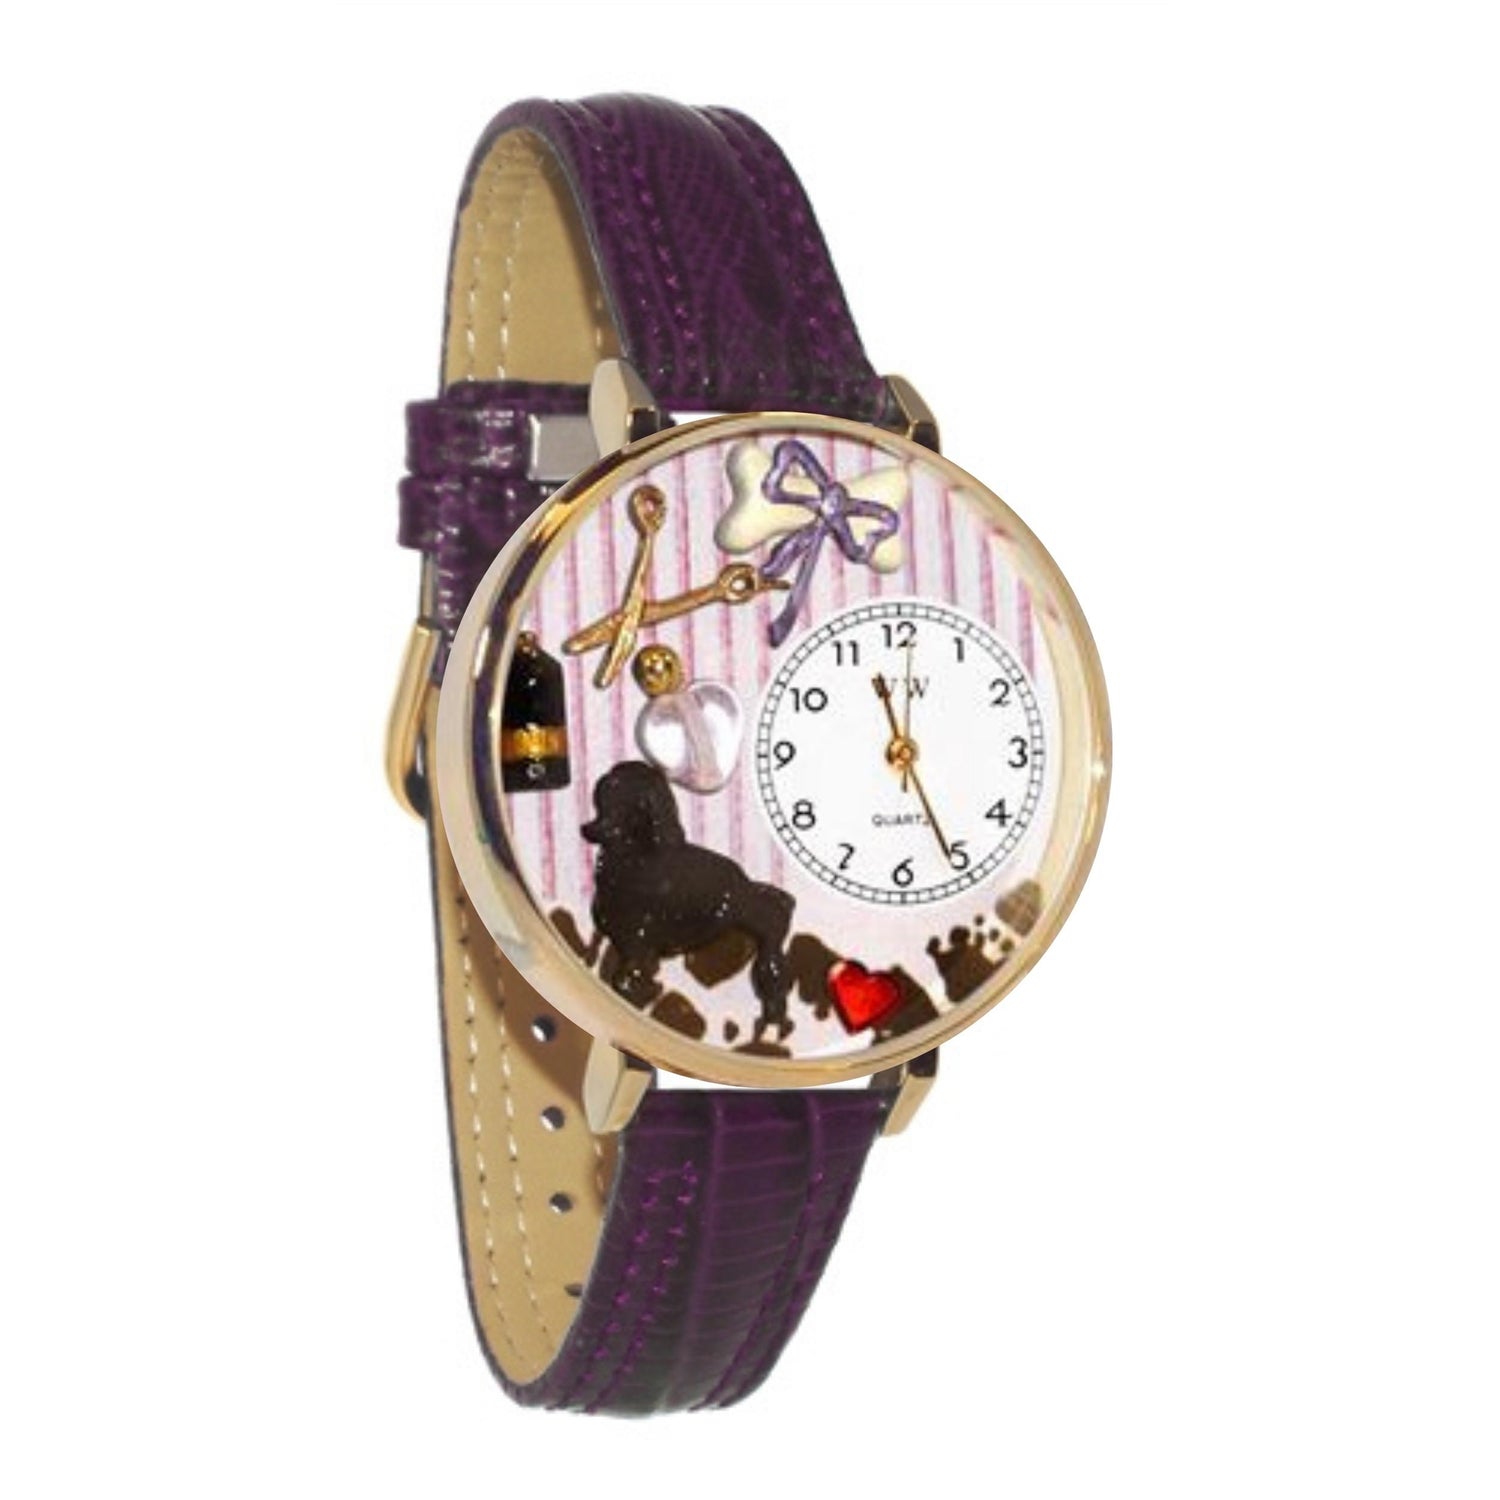 Whimsical Gifts | Dog Groomer 3D Watch Large Style | Handmade in USA | Professions Themed | Pet & Animal Professions | Novelty Unique Fun Miniatures Gift | Gold Finish Purple Leather Watch Band